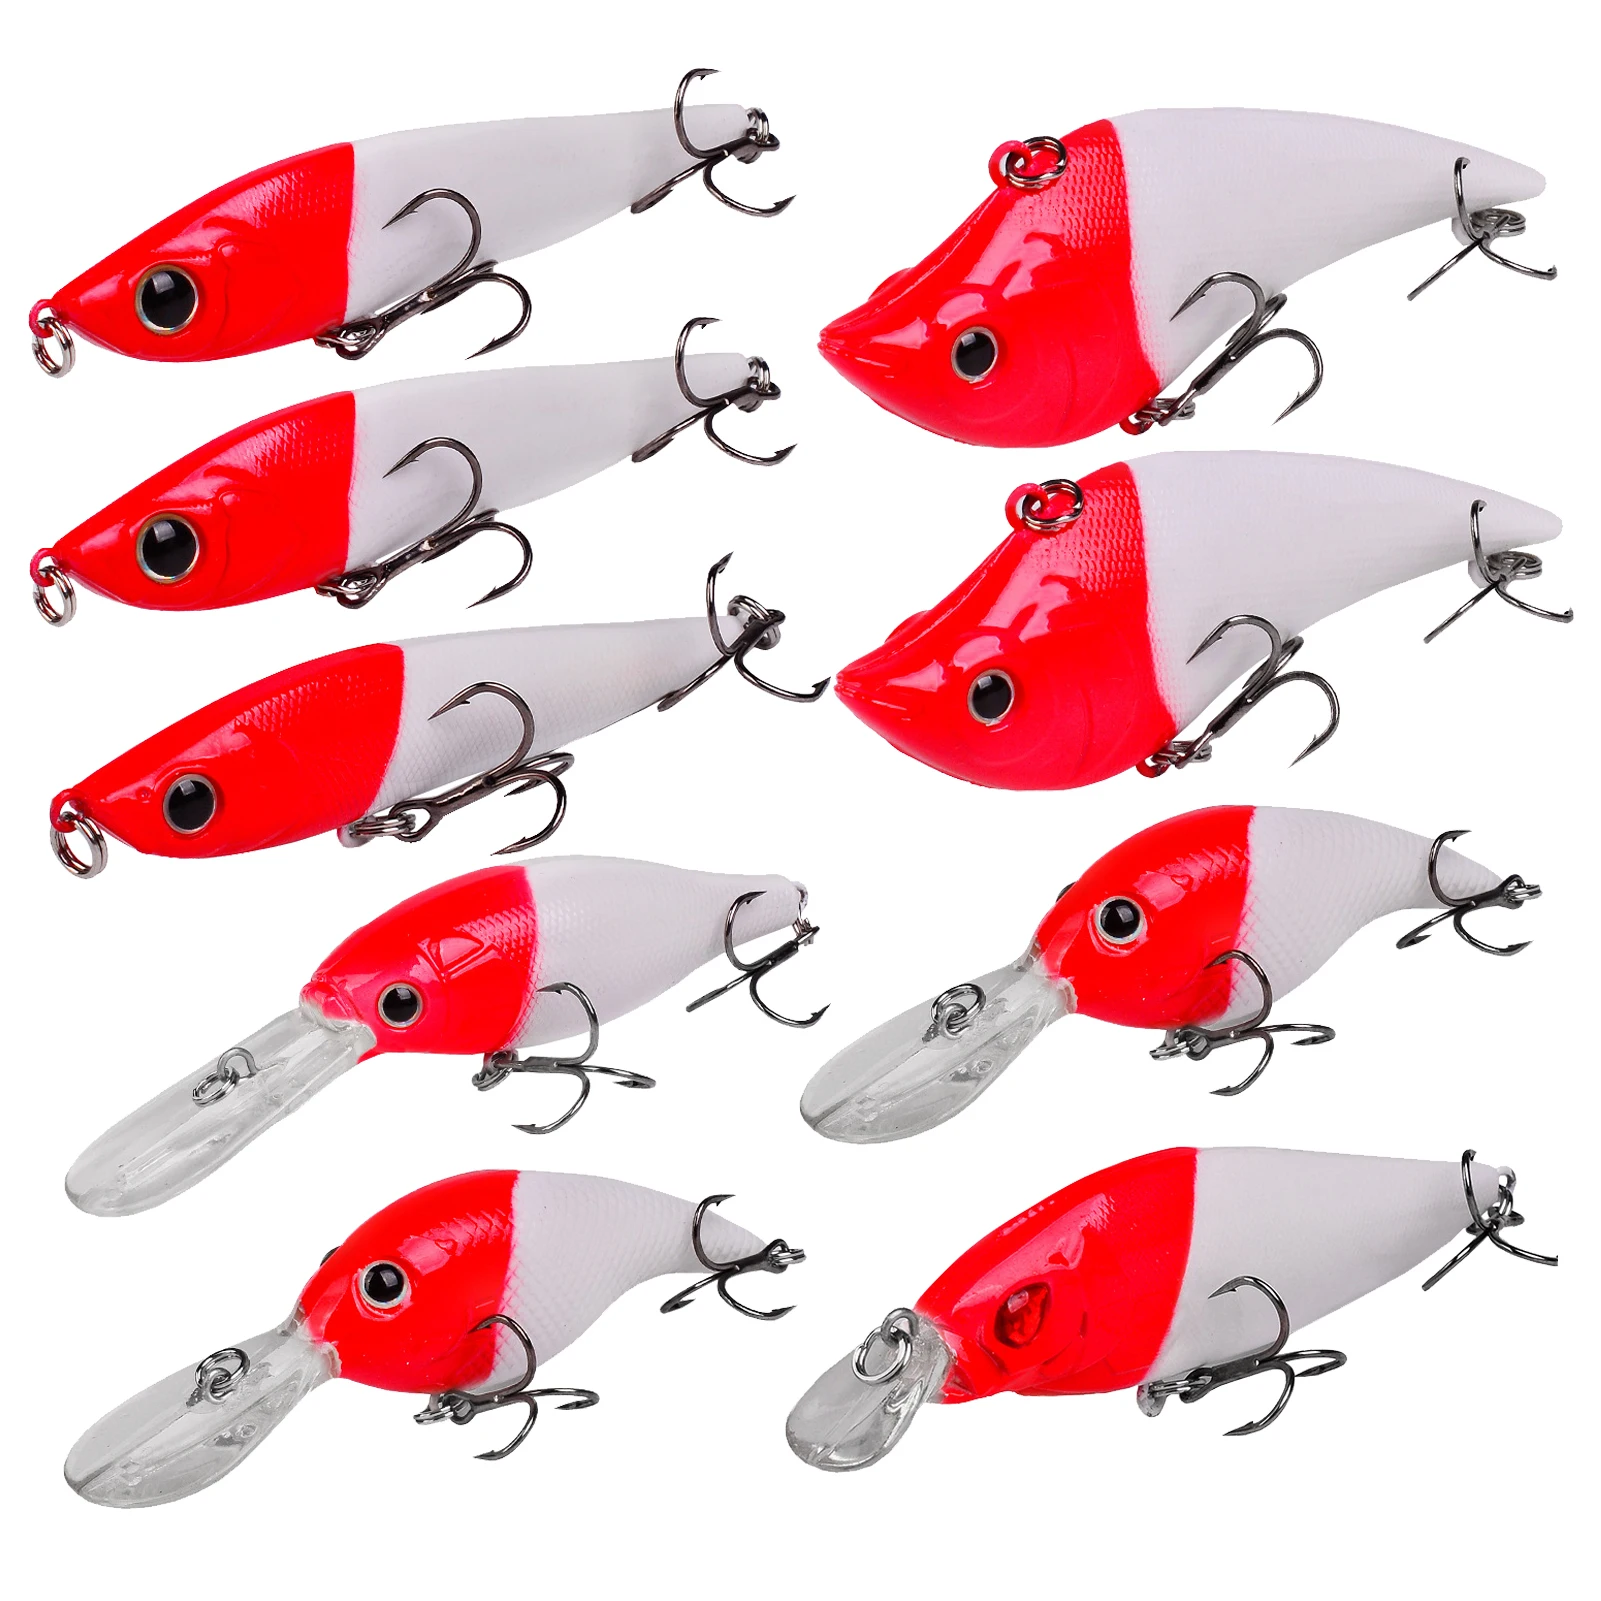 9pcs Bass Fishing Lures Kit Red Head Mixed Hard Baits Minnow Crankbait  Pencil Vib Bass Pike Swimbait For Saltwater/freshwater - Fishing Lures -  AliExpress